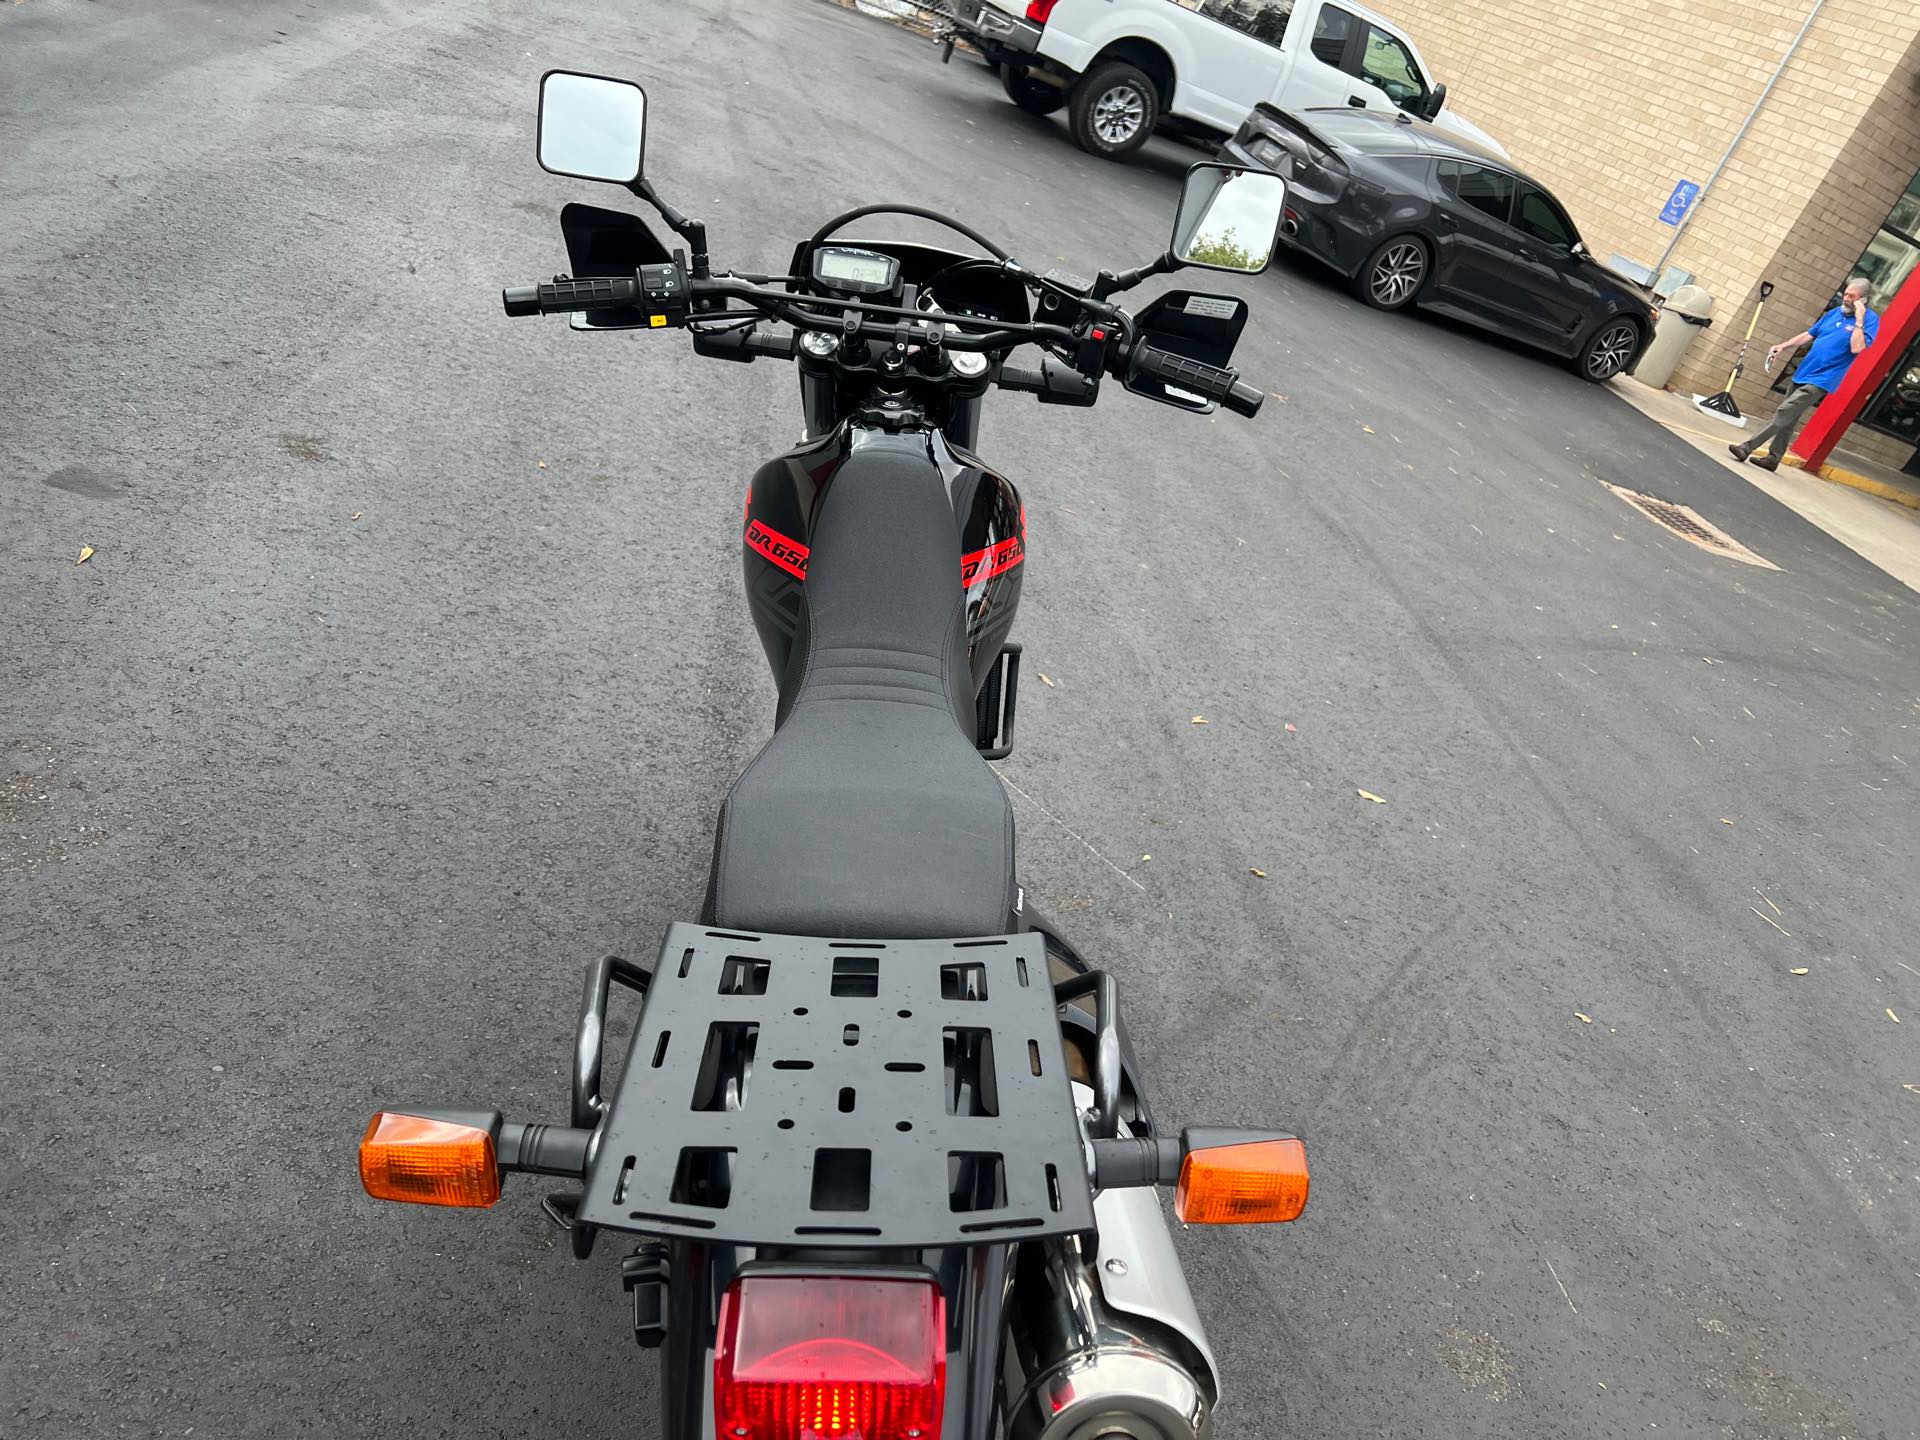 2019 Suzuki DR 650S at Aces Motorcycles - Fort Collins